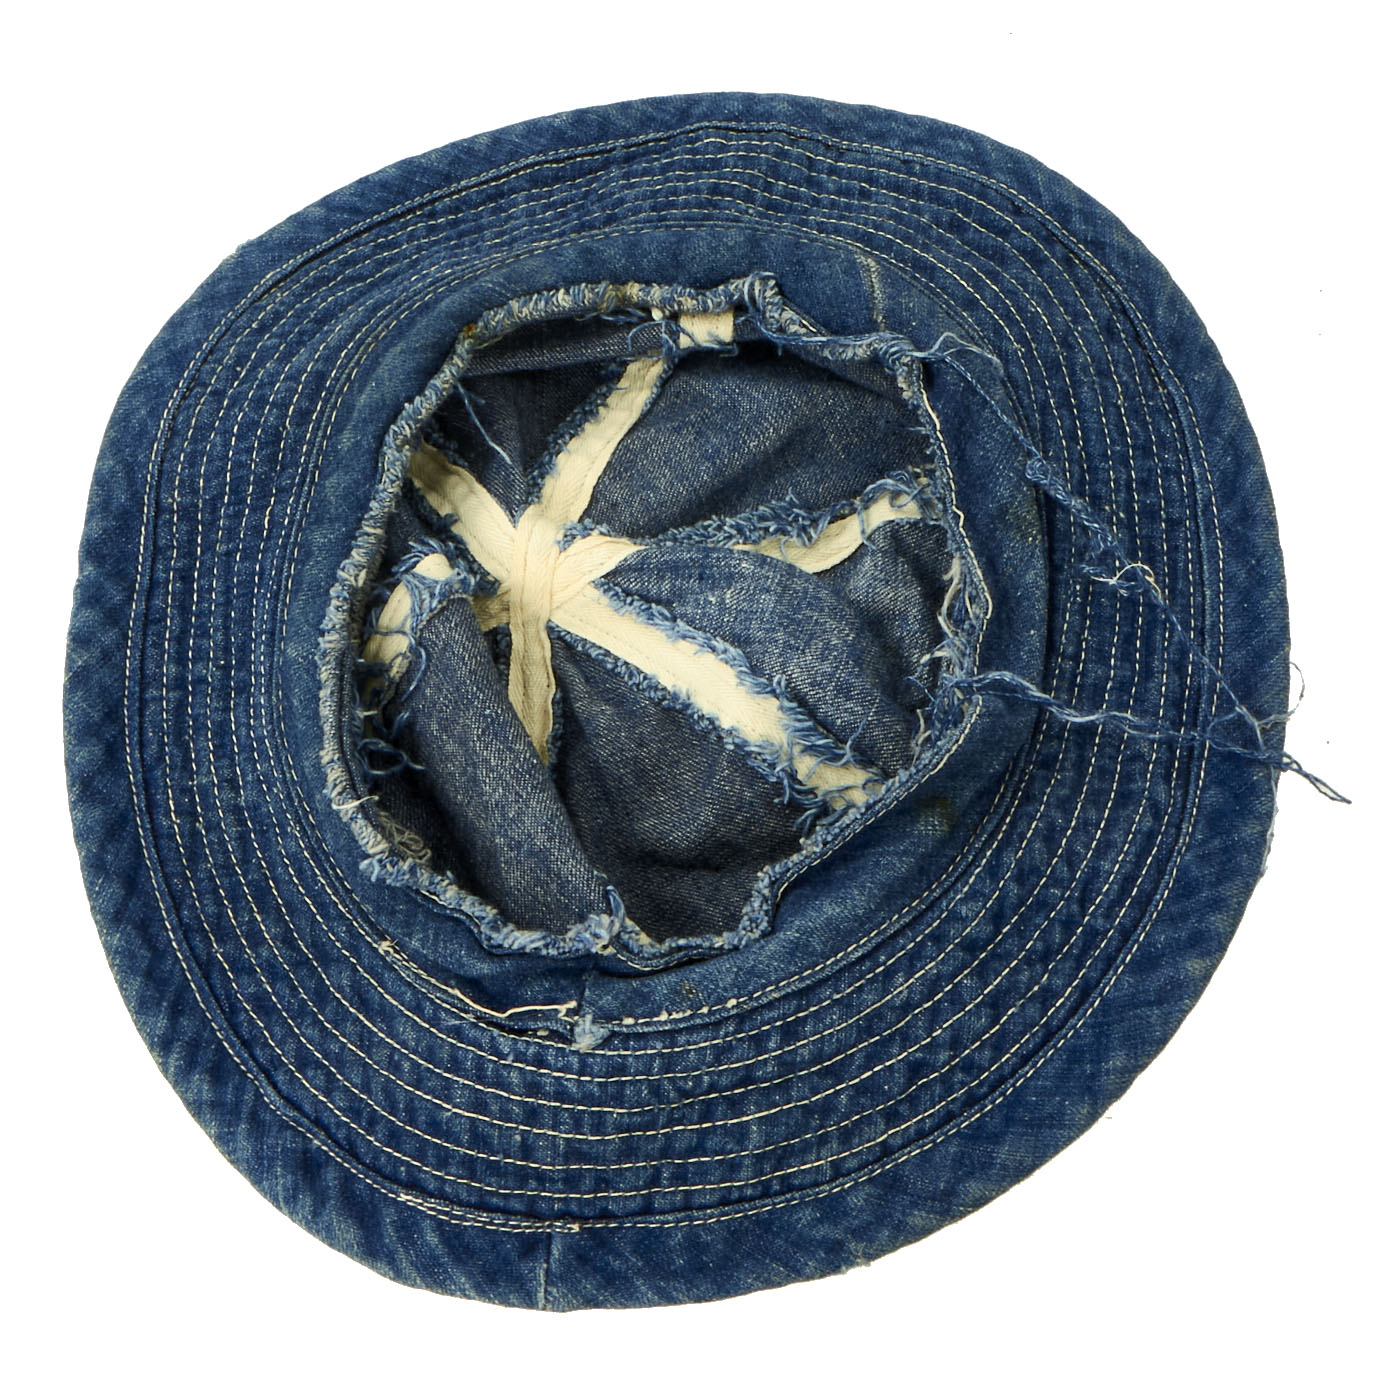 40s【SPECIAL】US ARMY M-37 Denim Hat 7 1/4